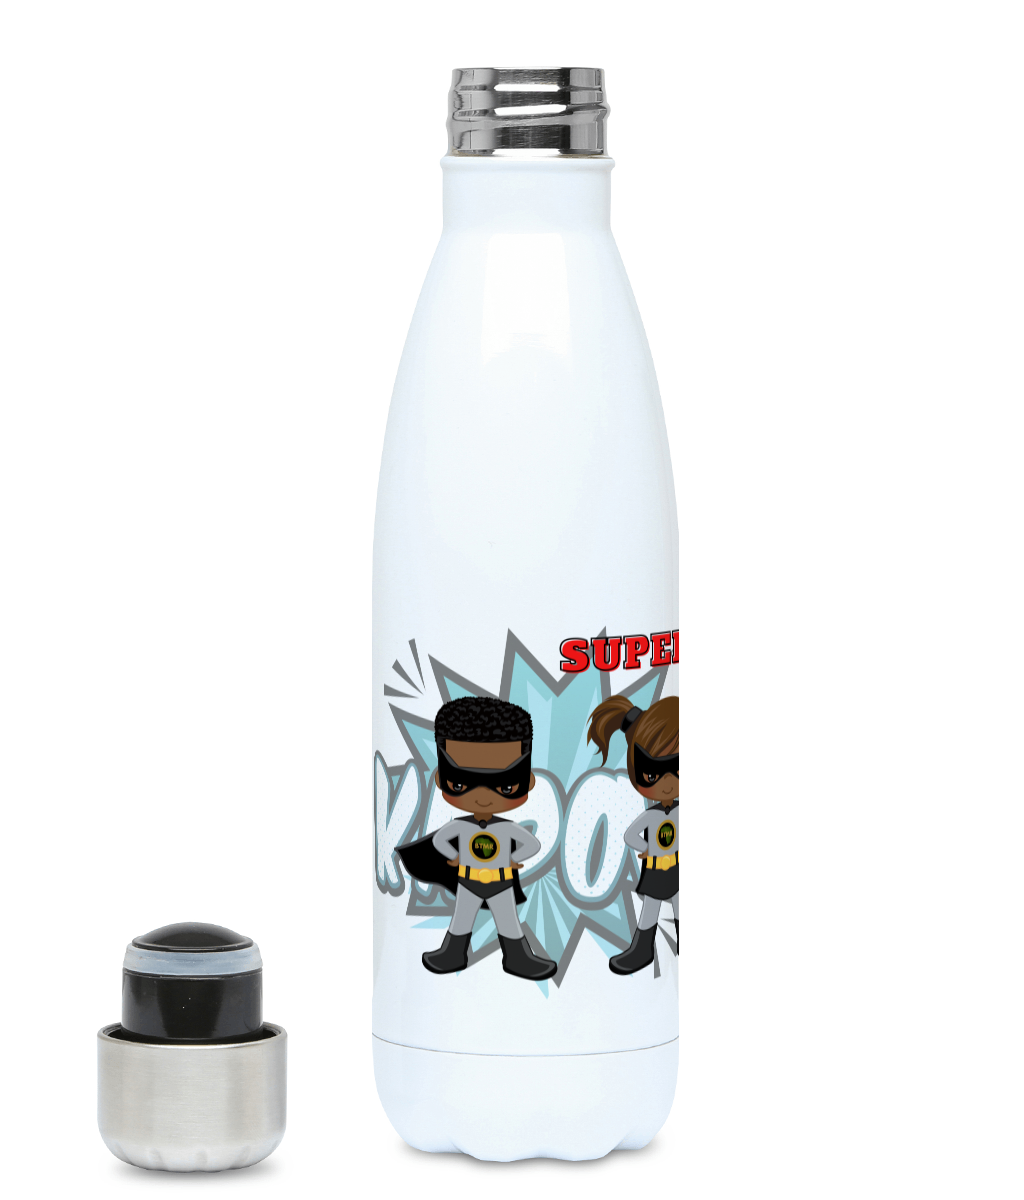 Left Profile of personalised Hydro Flask, featuring  4 characters from the BlackLikeMe SuperHero collection, 2 boy superheroes - in grey and two girl superheroines in blue and grey. Behind is an action background featuring the words Kapow and Boom. Hydro Flask is personalised at the top of the picture 